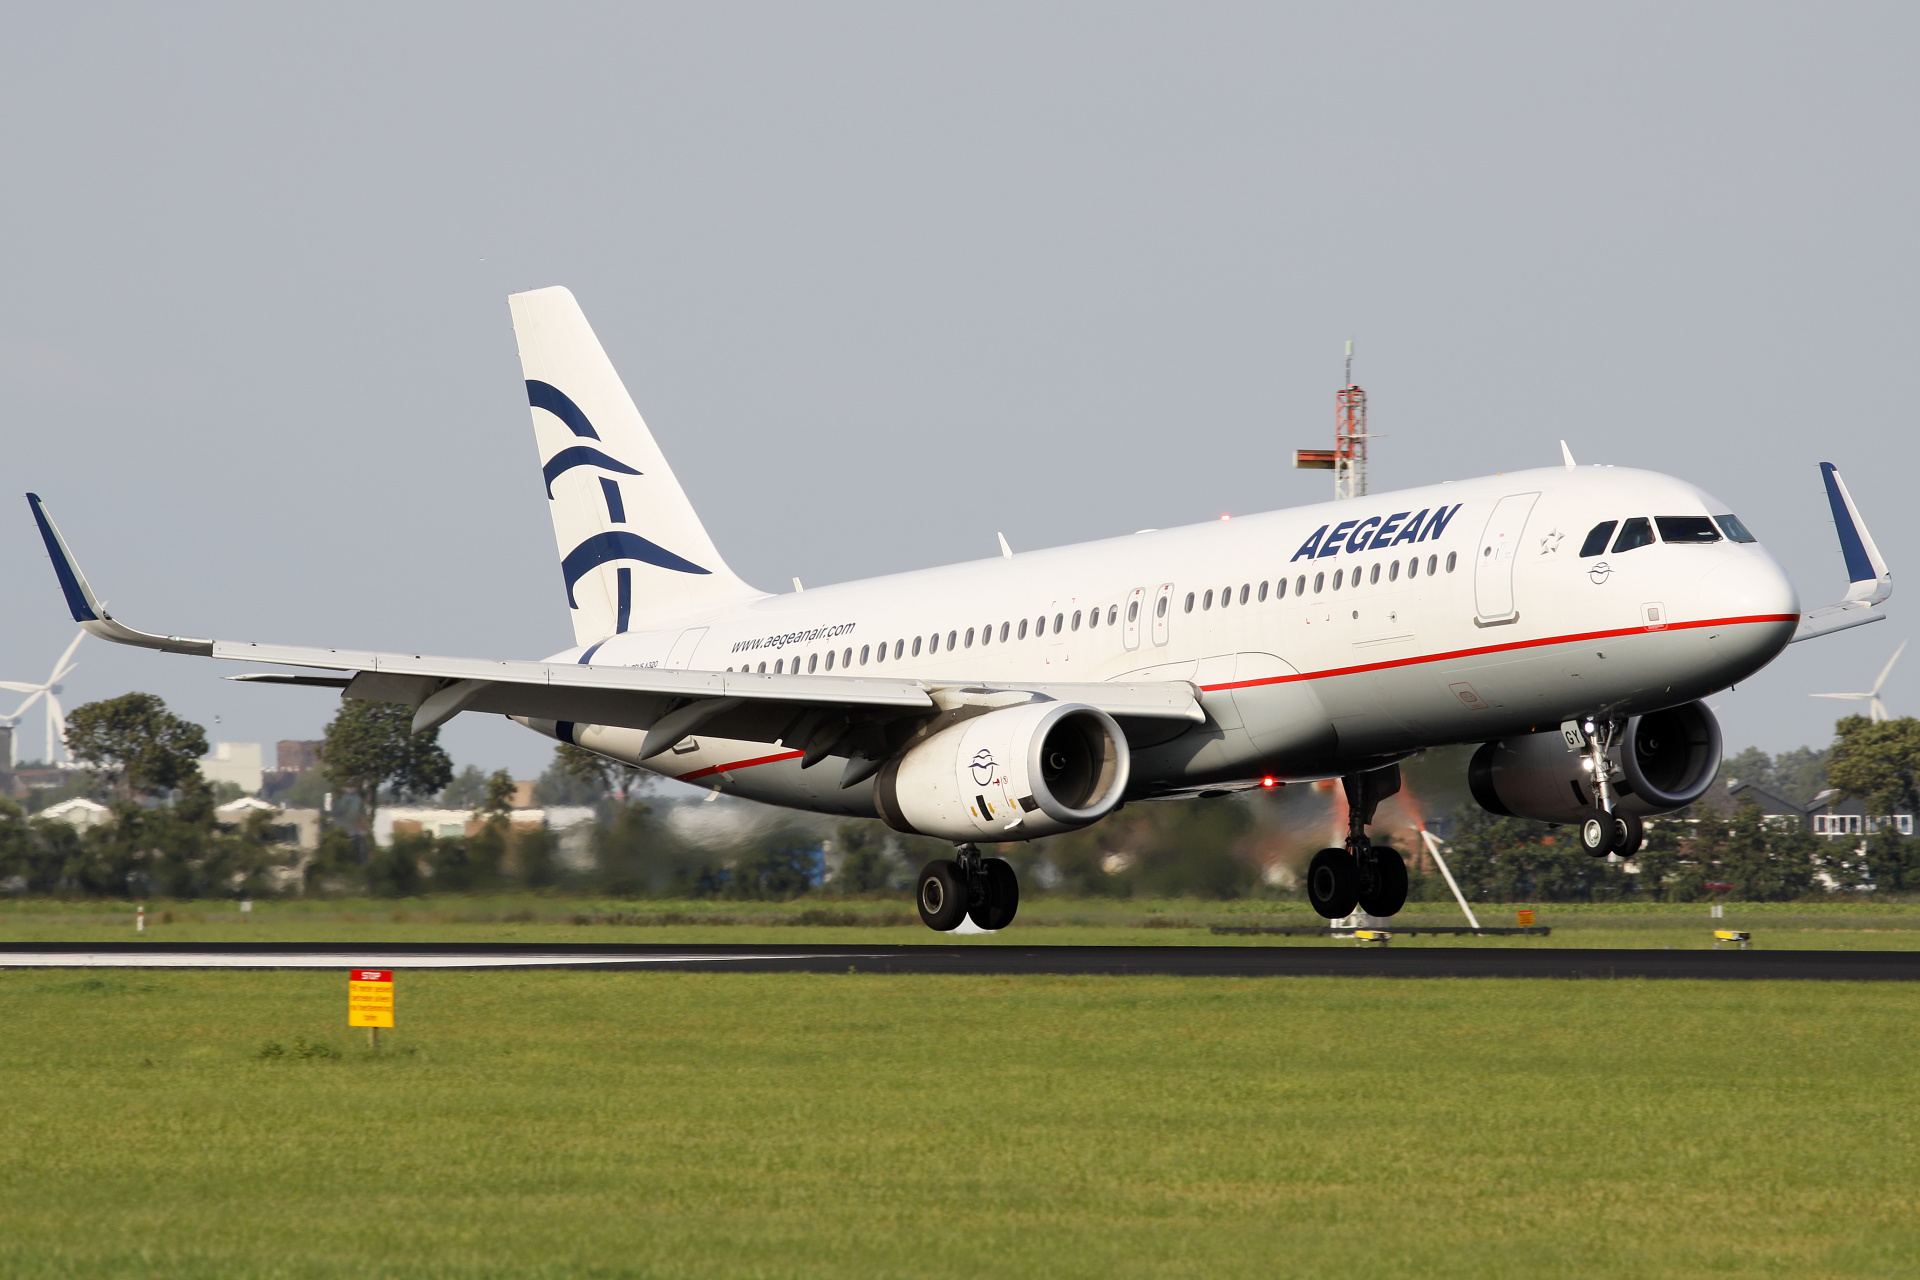 SX-DGY, Aegean Airlines (Aircraft » Schiphol Spotting » Airbus A320-200)